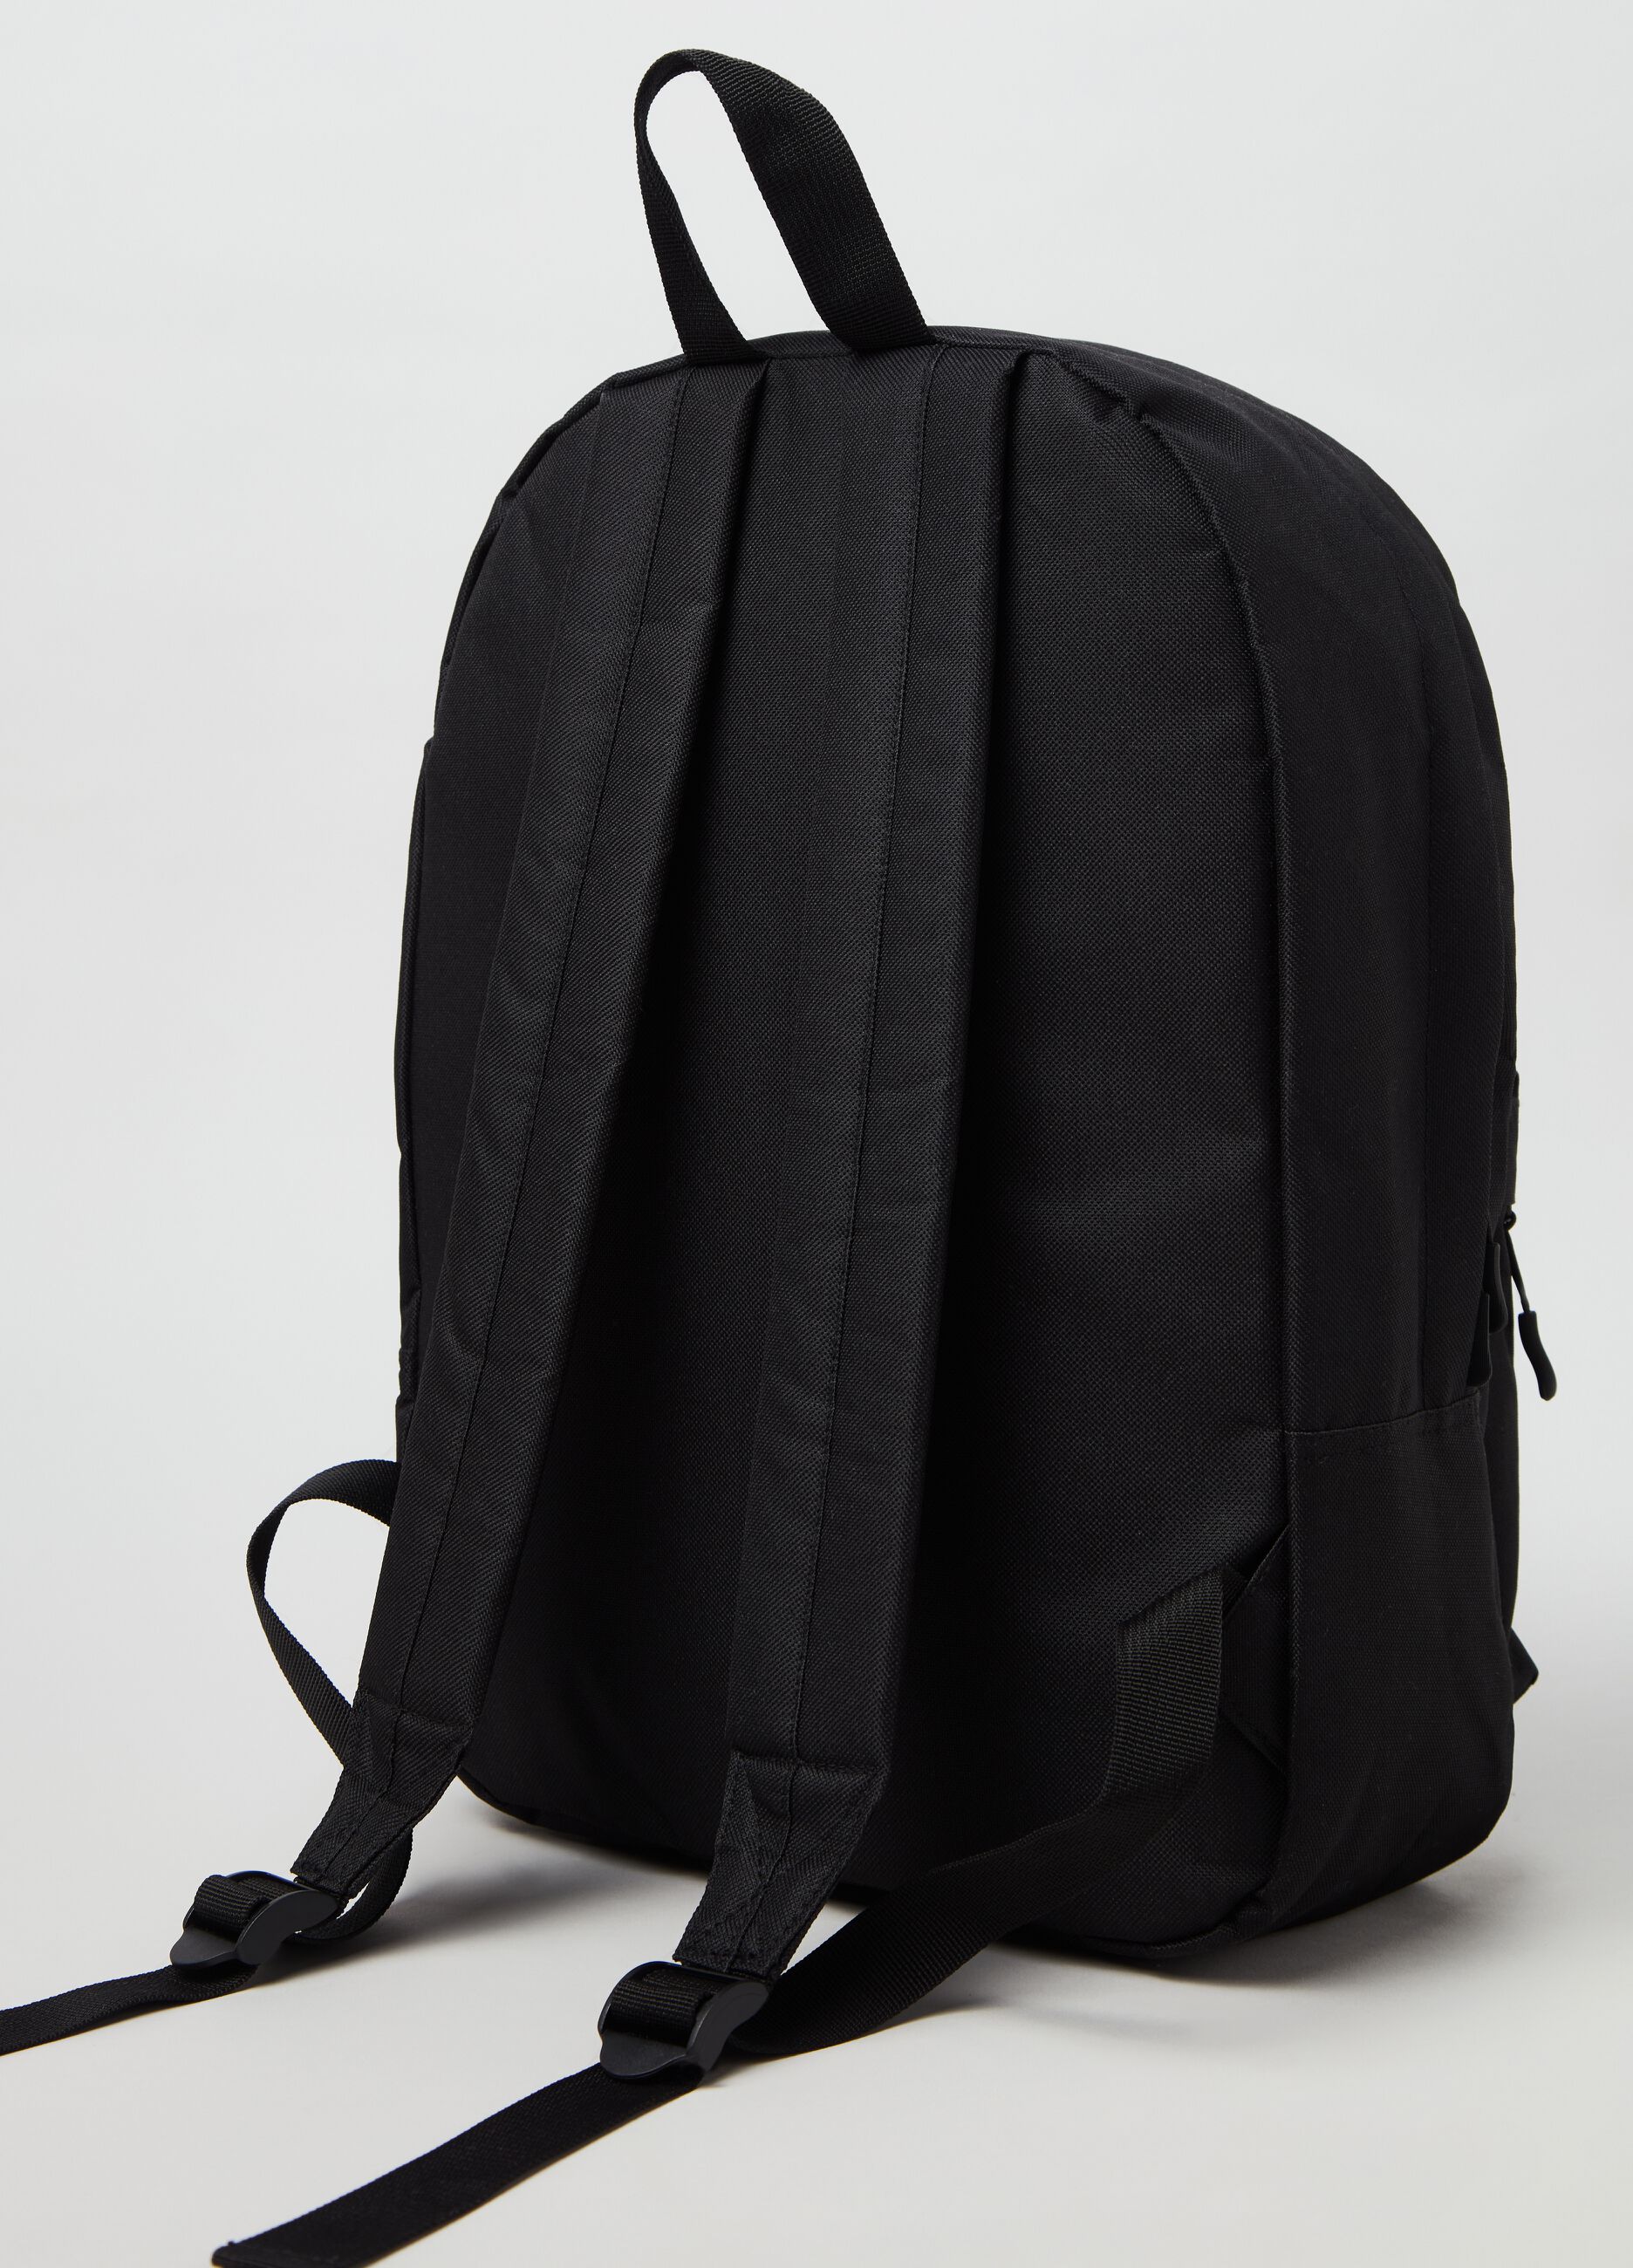 Backpack with external pocket